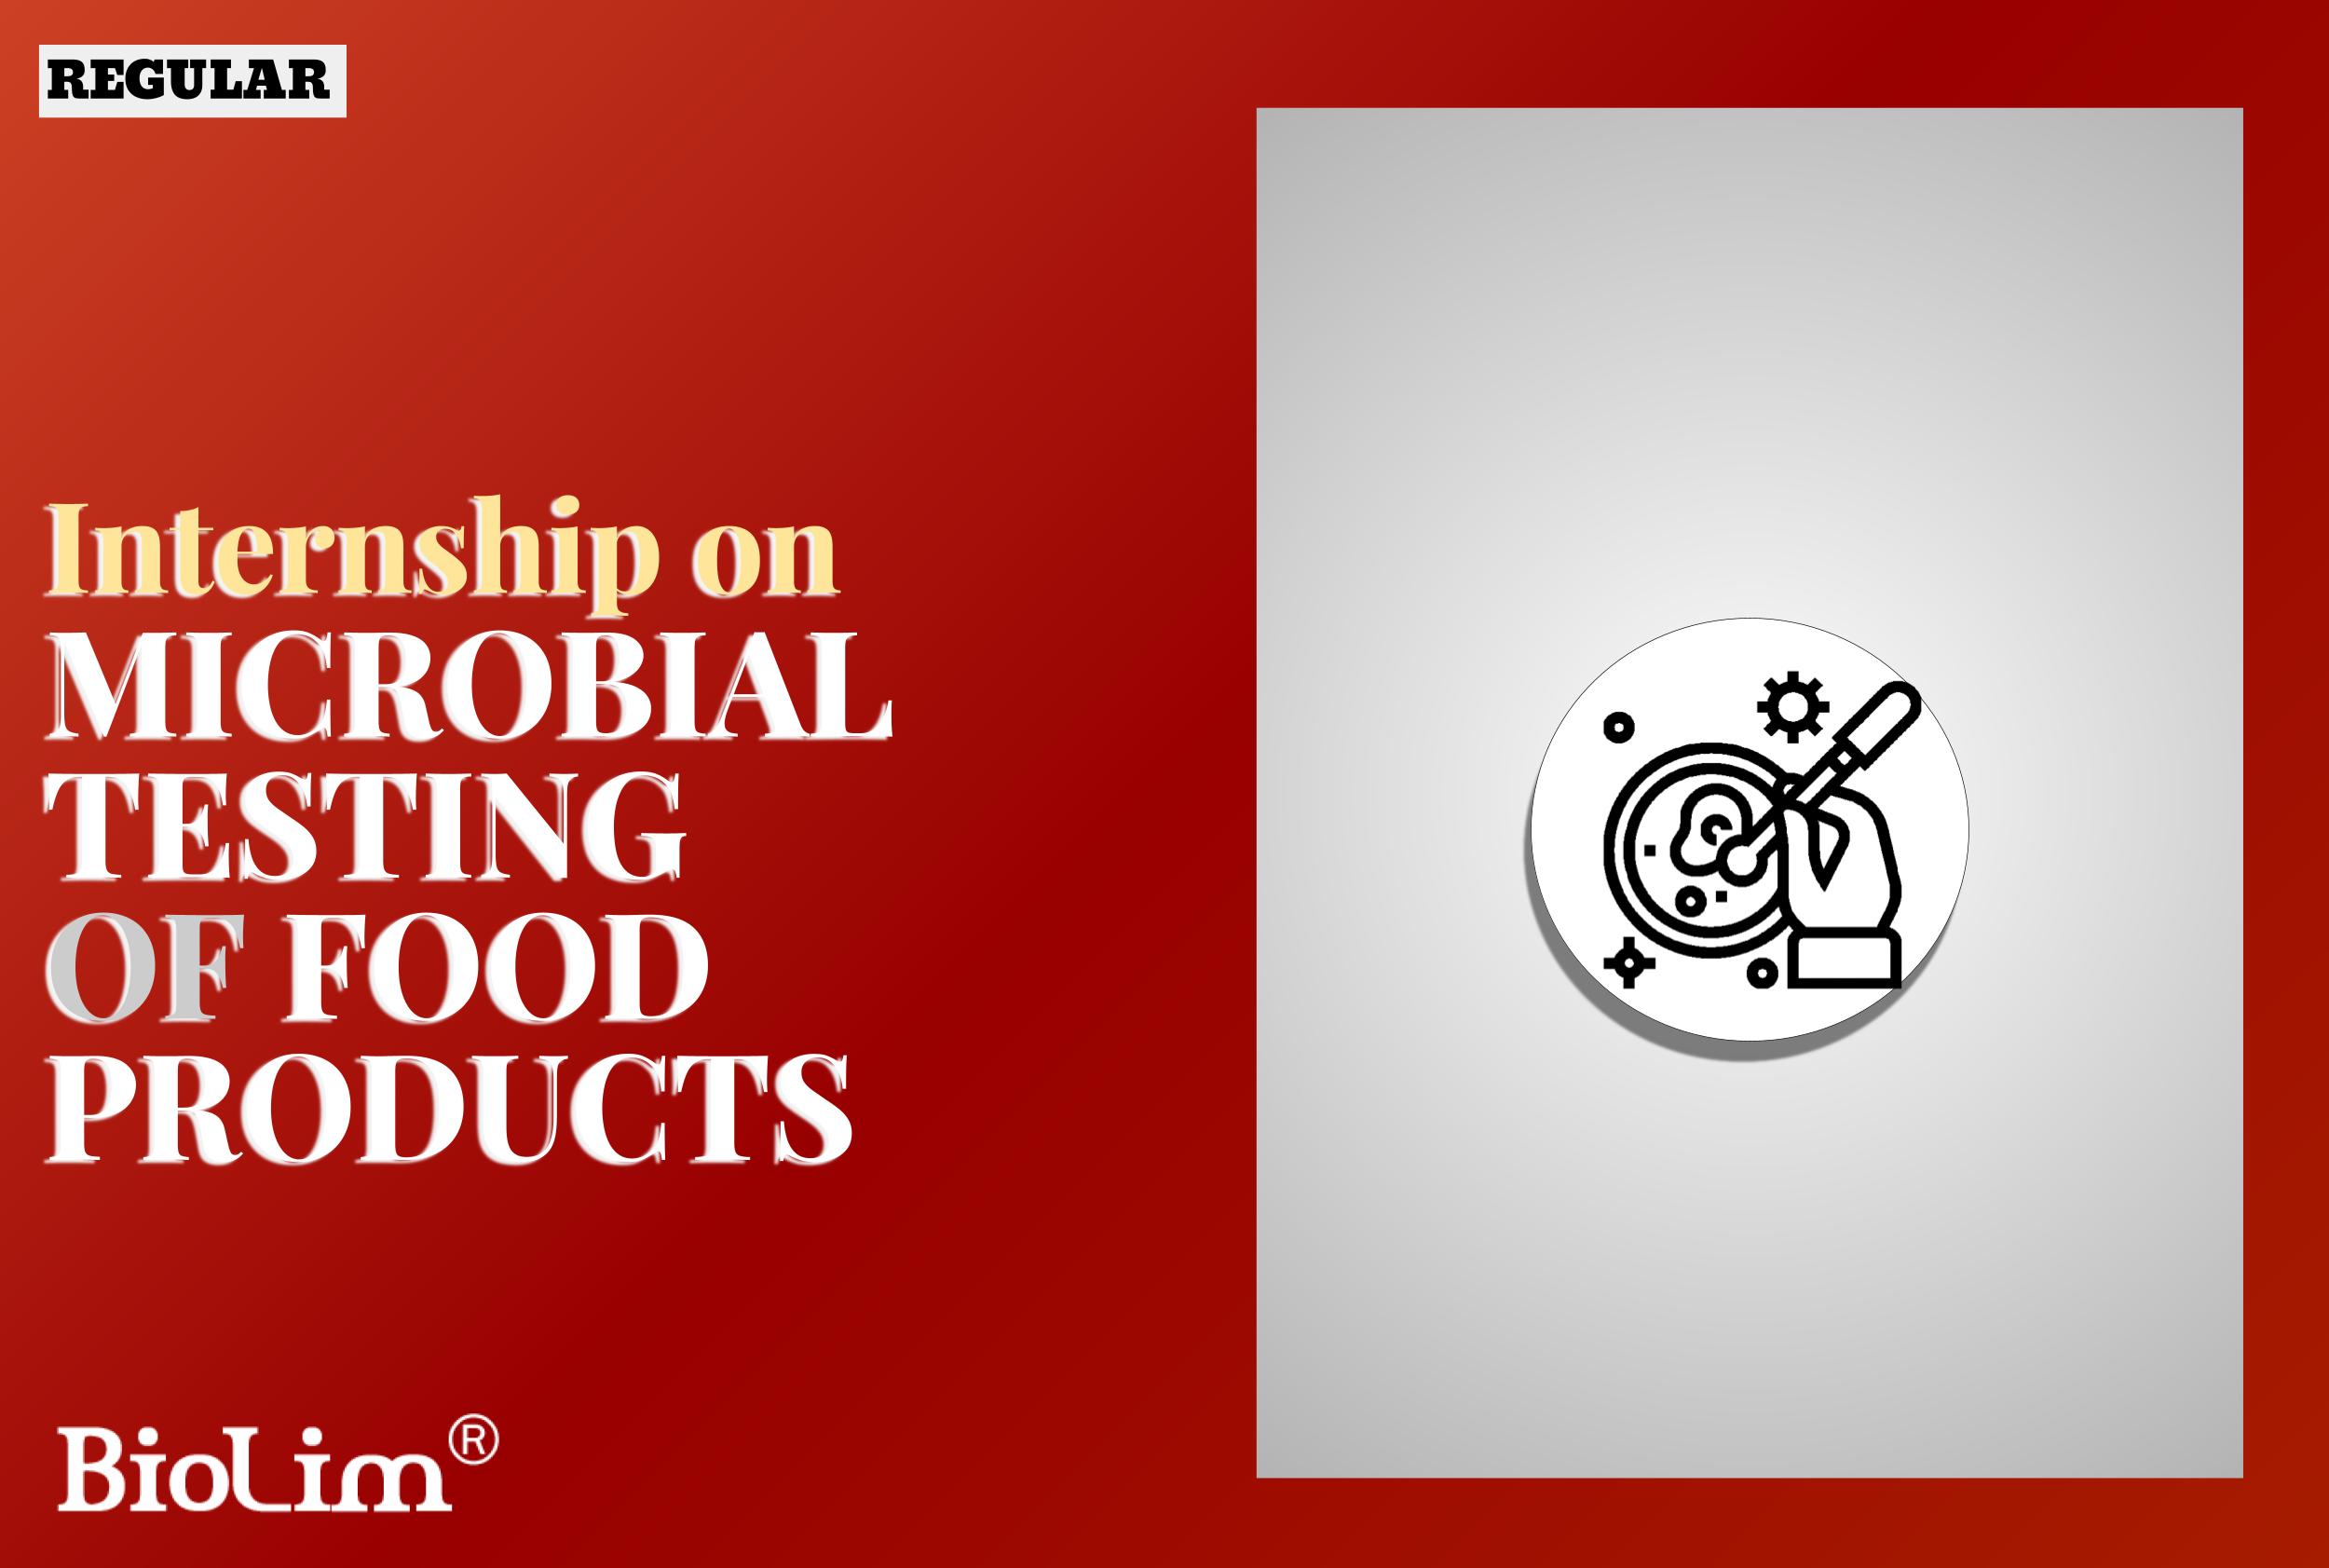 Internship on microbial testing of food products